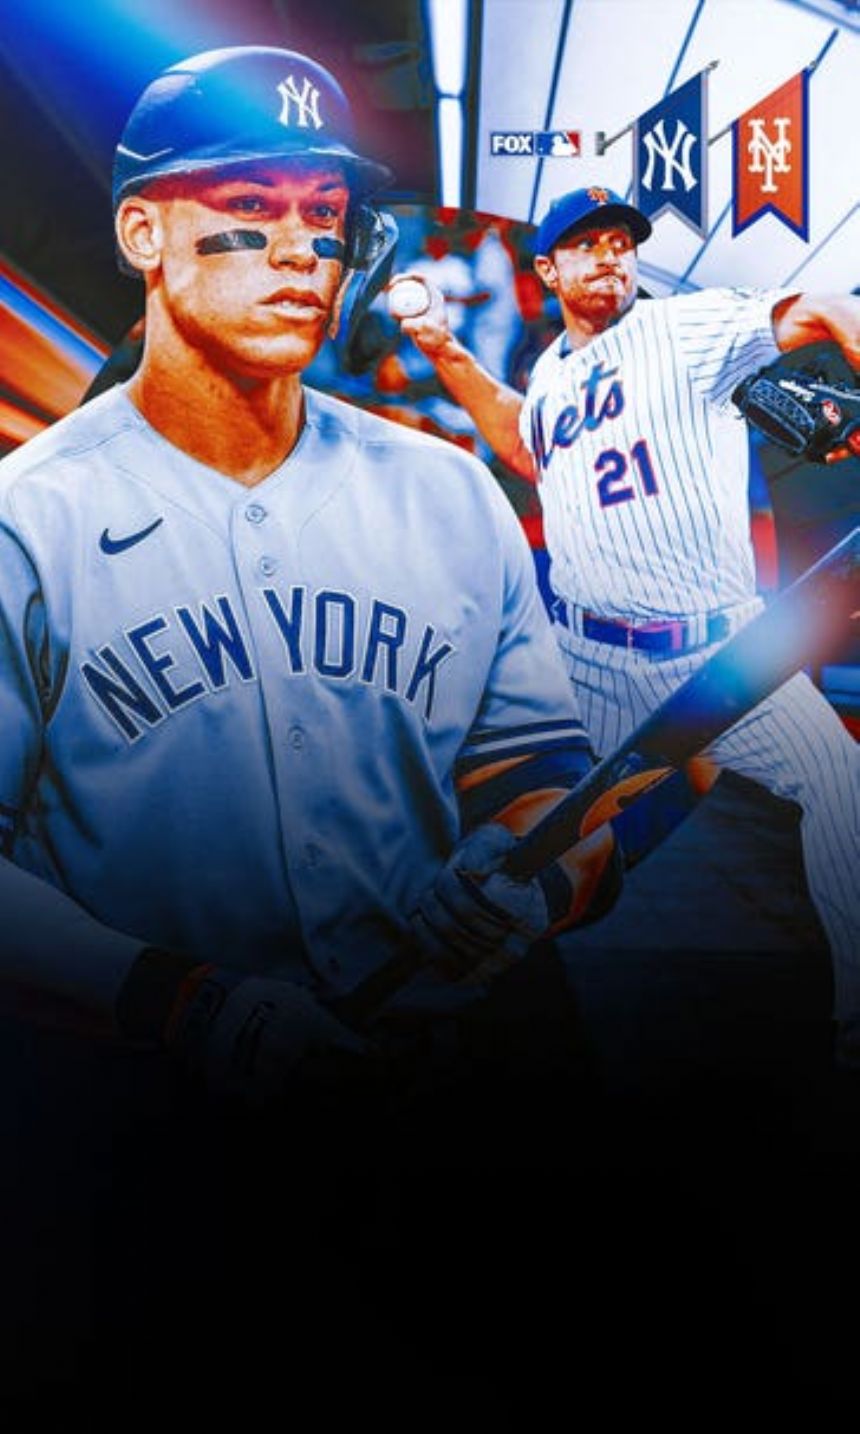 Yankees, Mets playing like they're headed to Subway World Series